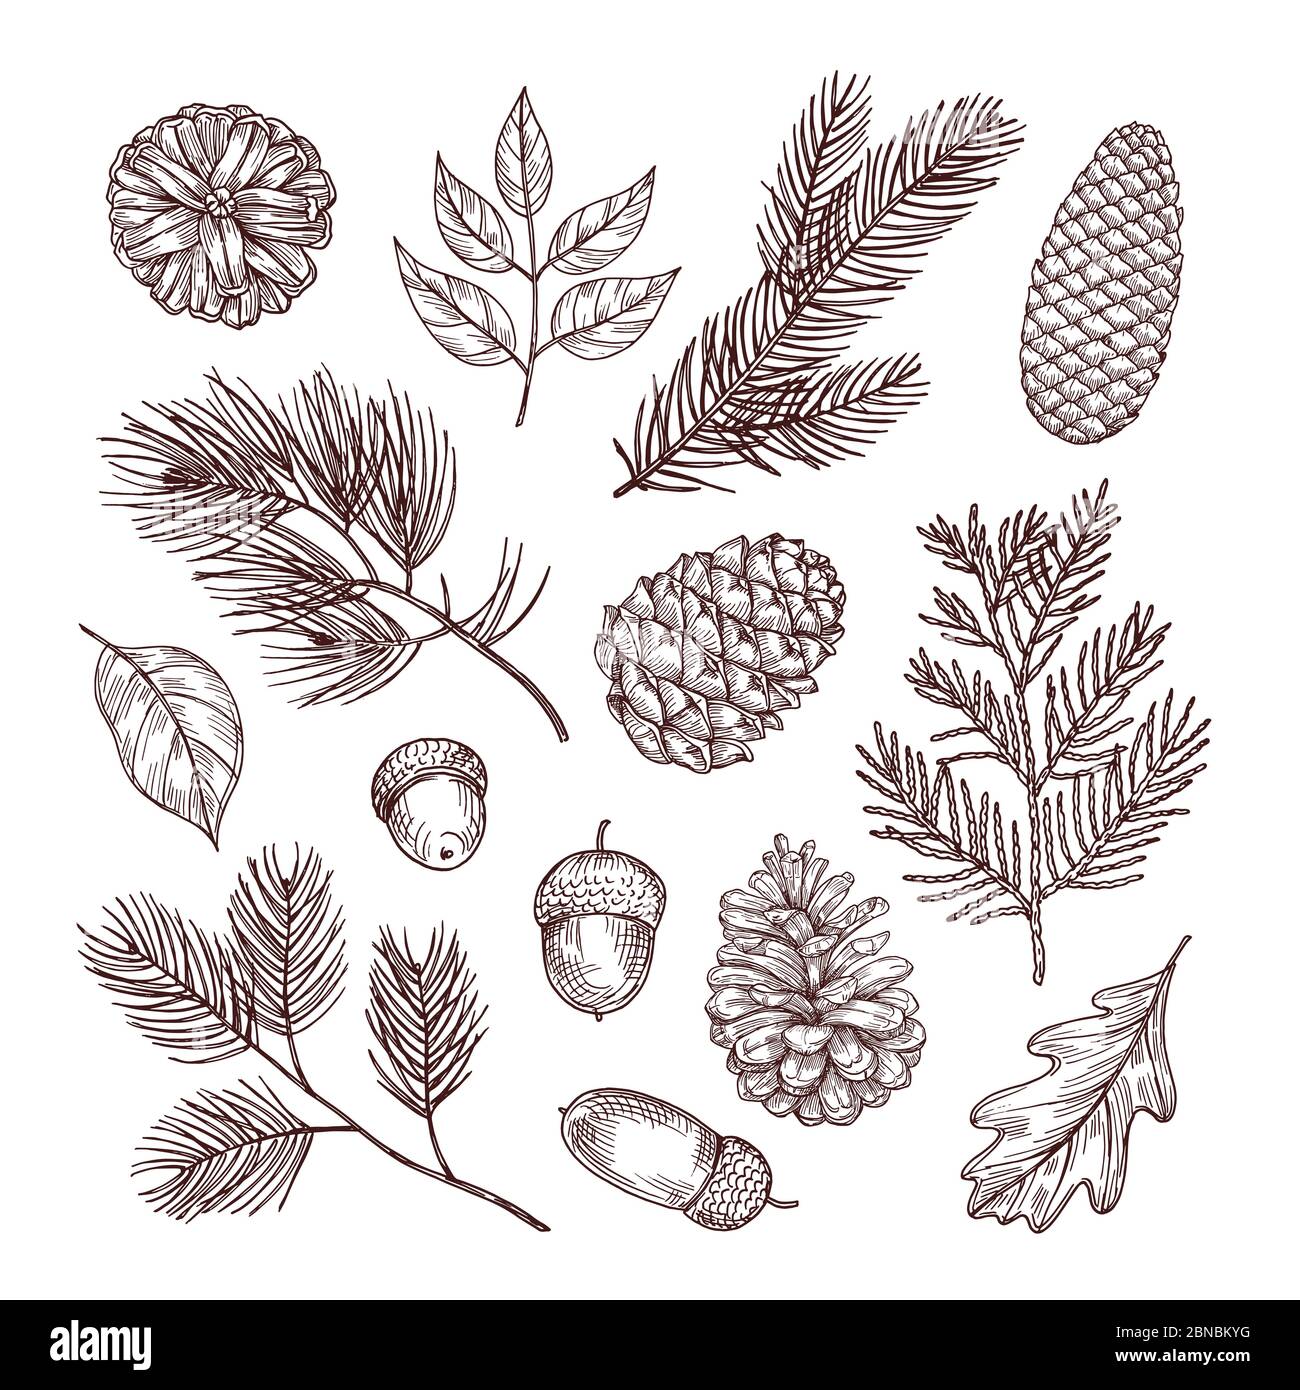 Sketch fir branches. Acorns and pine cones. Christmas, winter and autumn forest elements. Hand drawn vintage vector isolated set. Illustration of nature decoration drawing fir Stock Vector